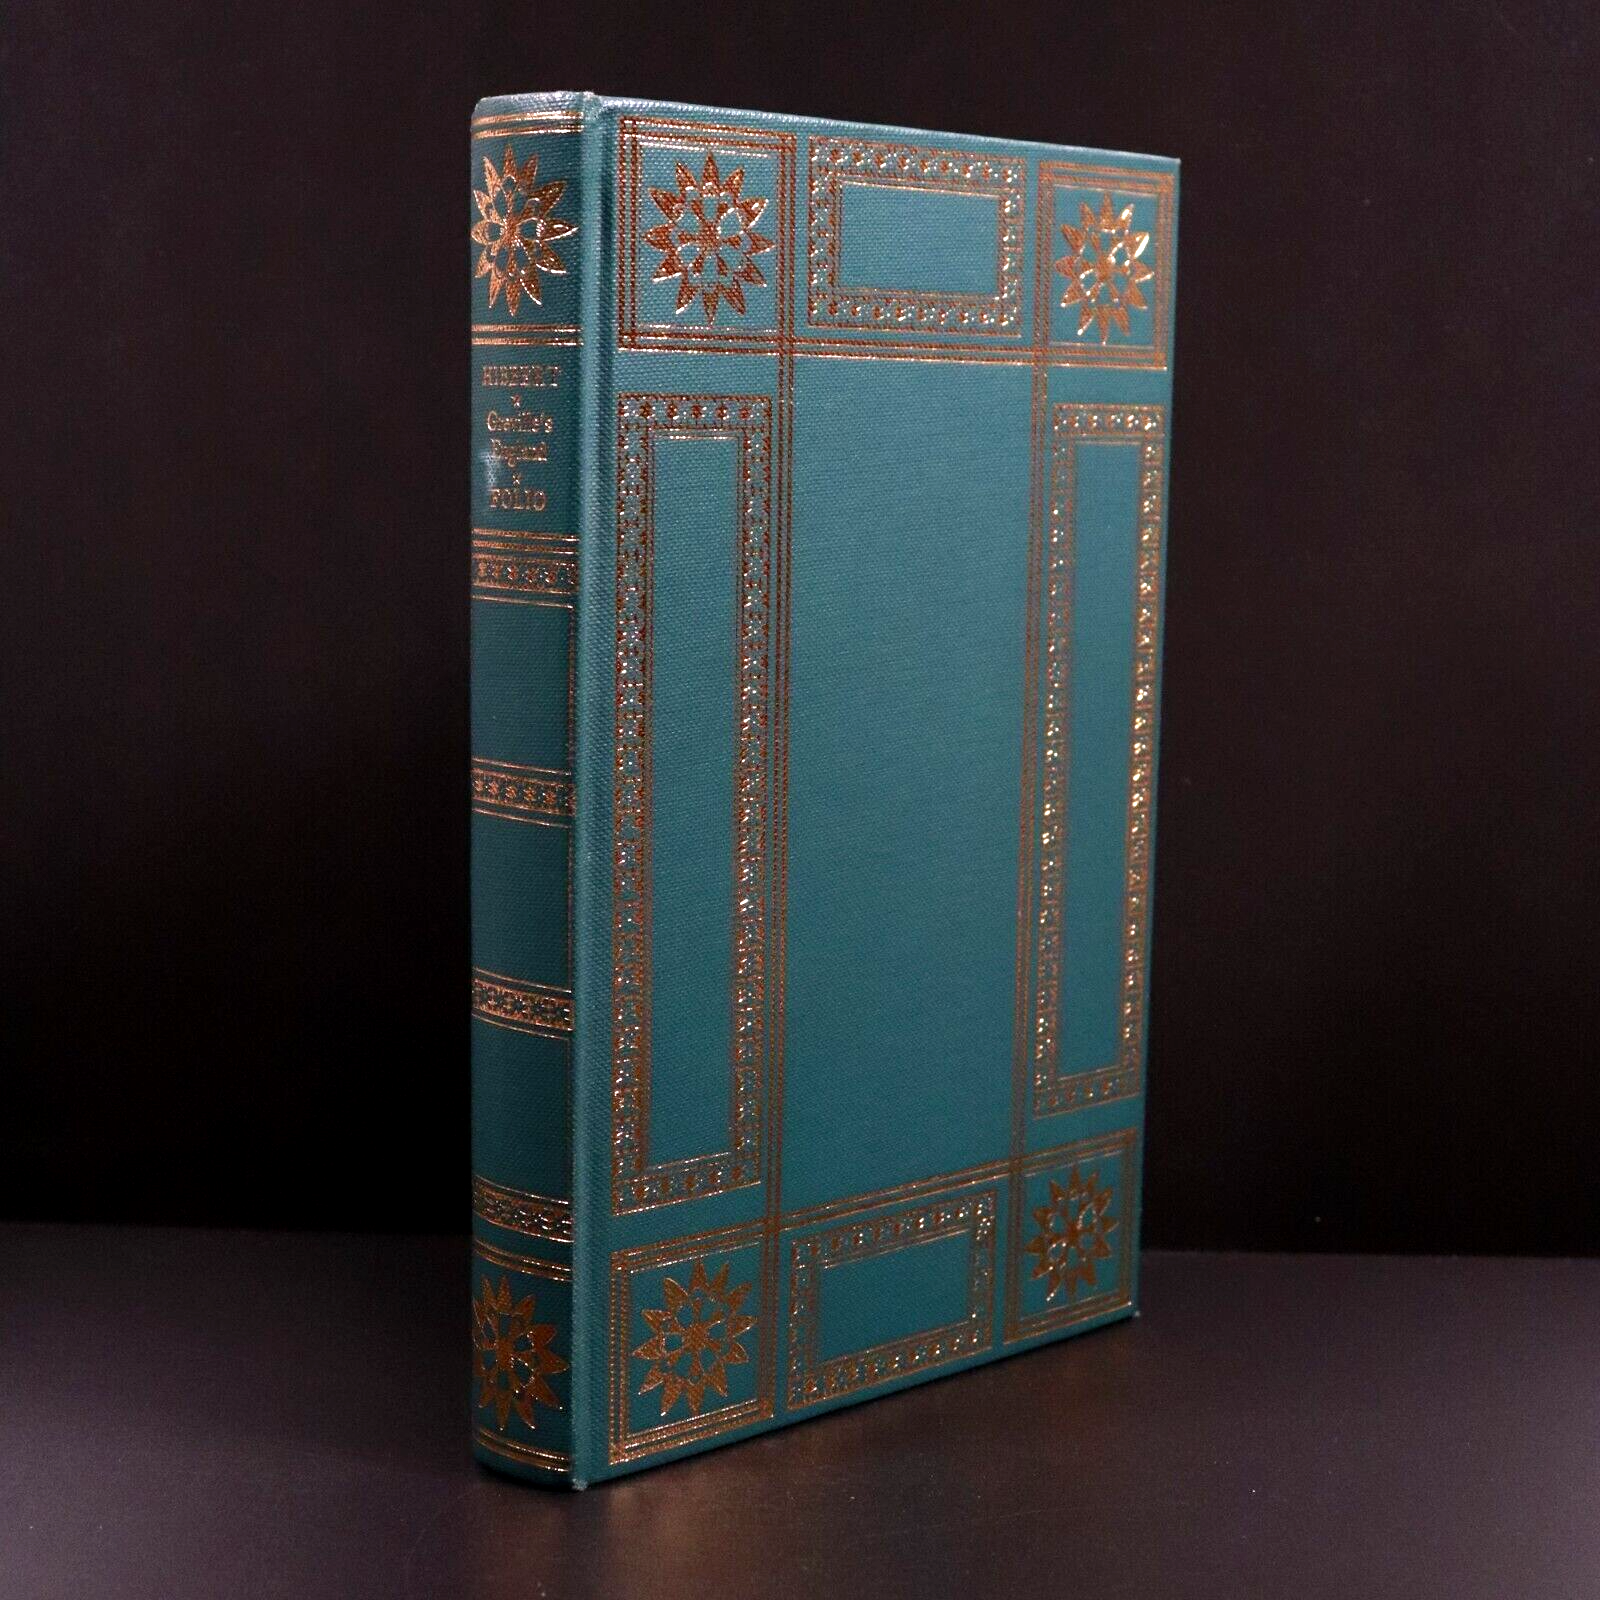 1981 Greville's England Diaries Of Charles Greville Folio Society History Book